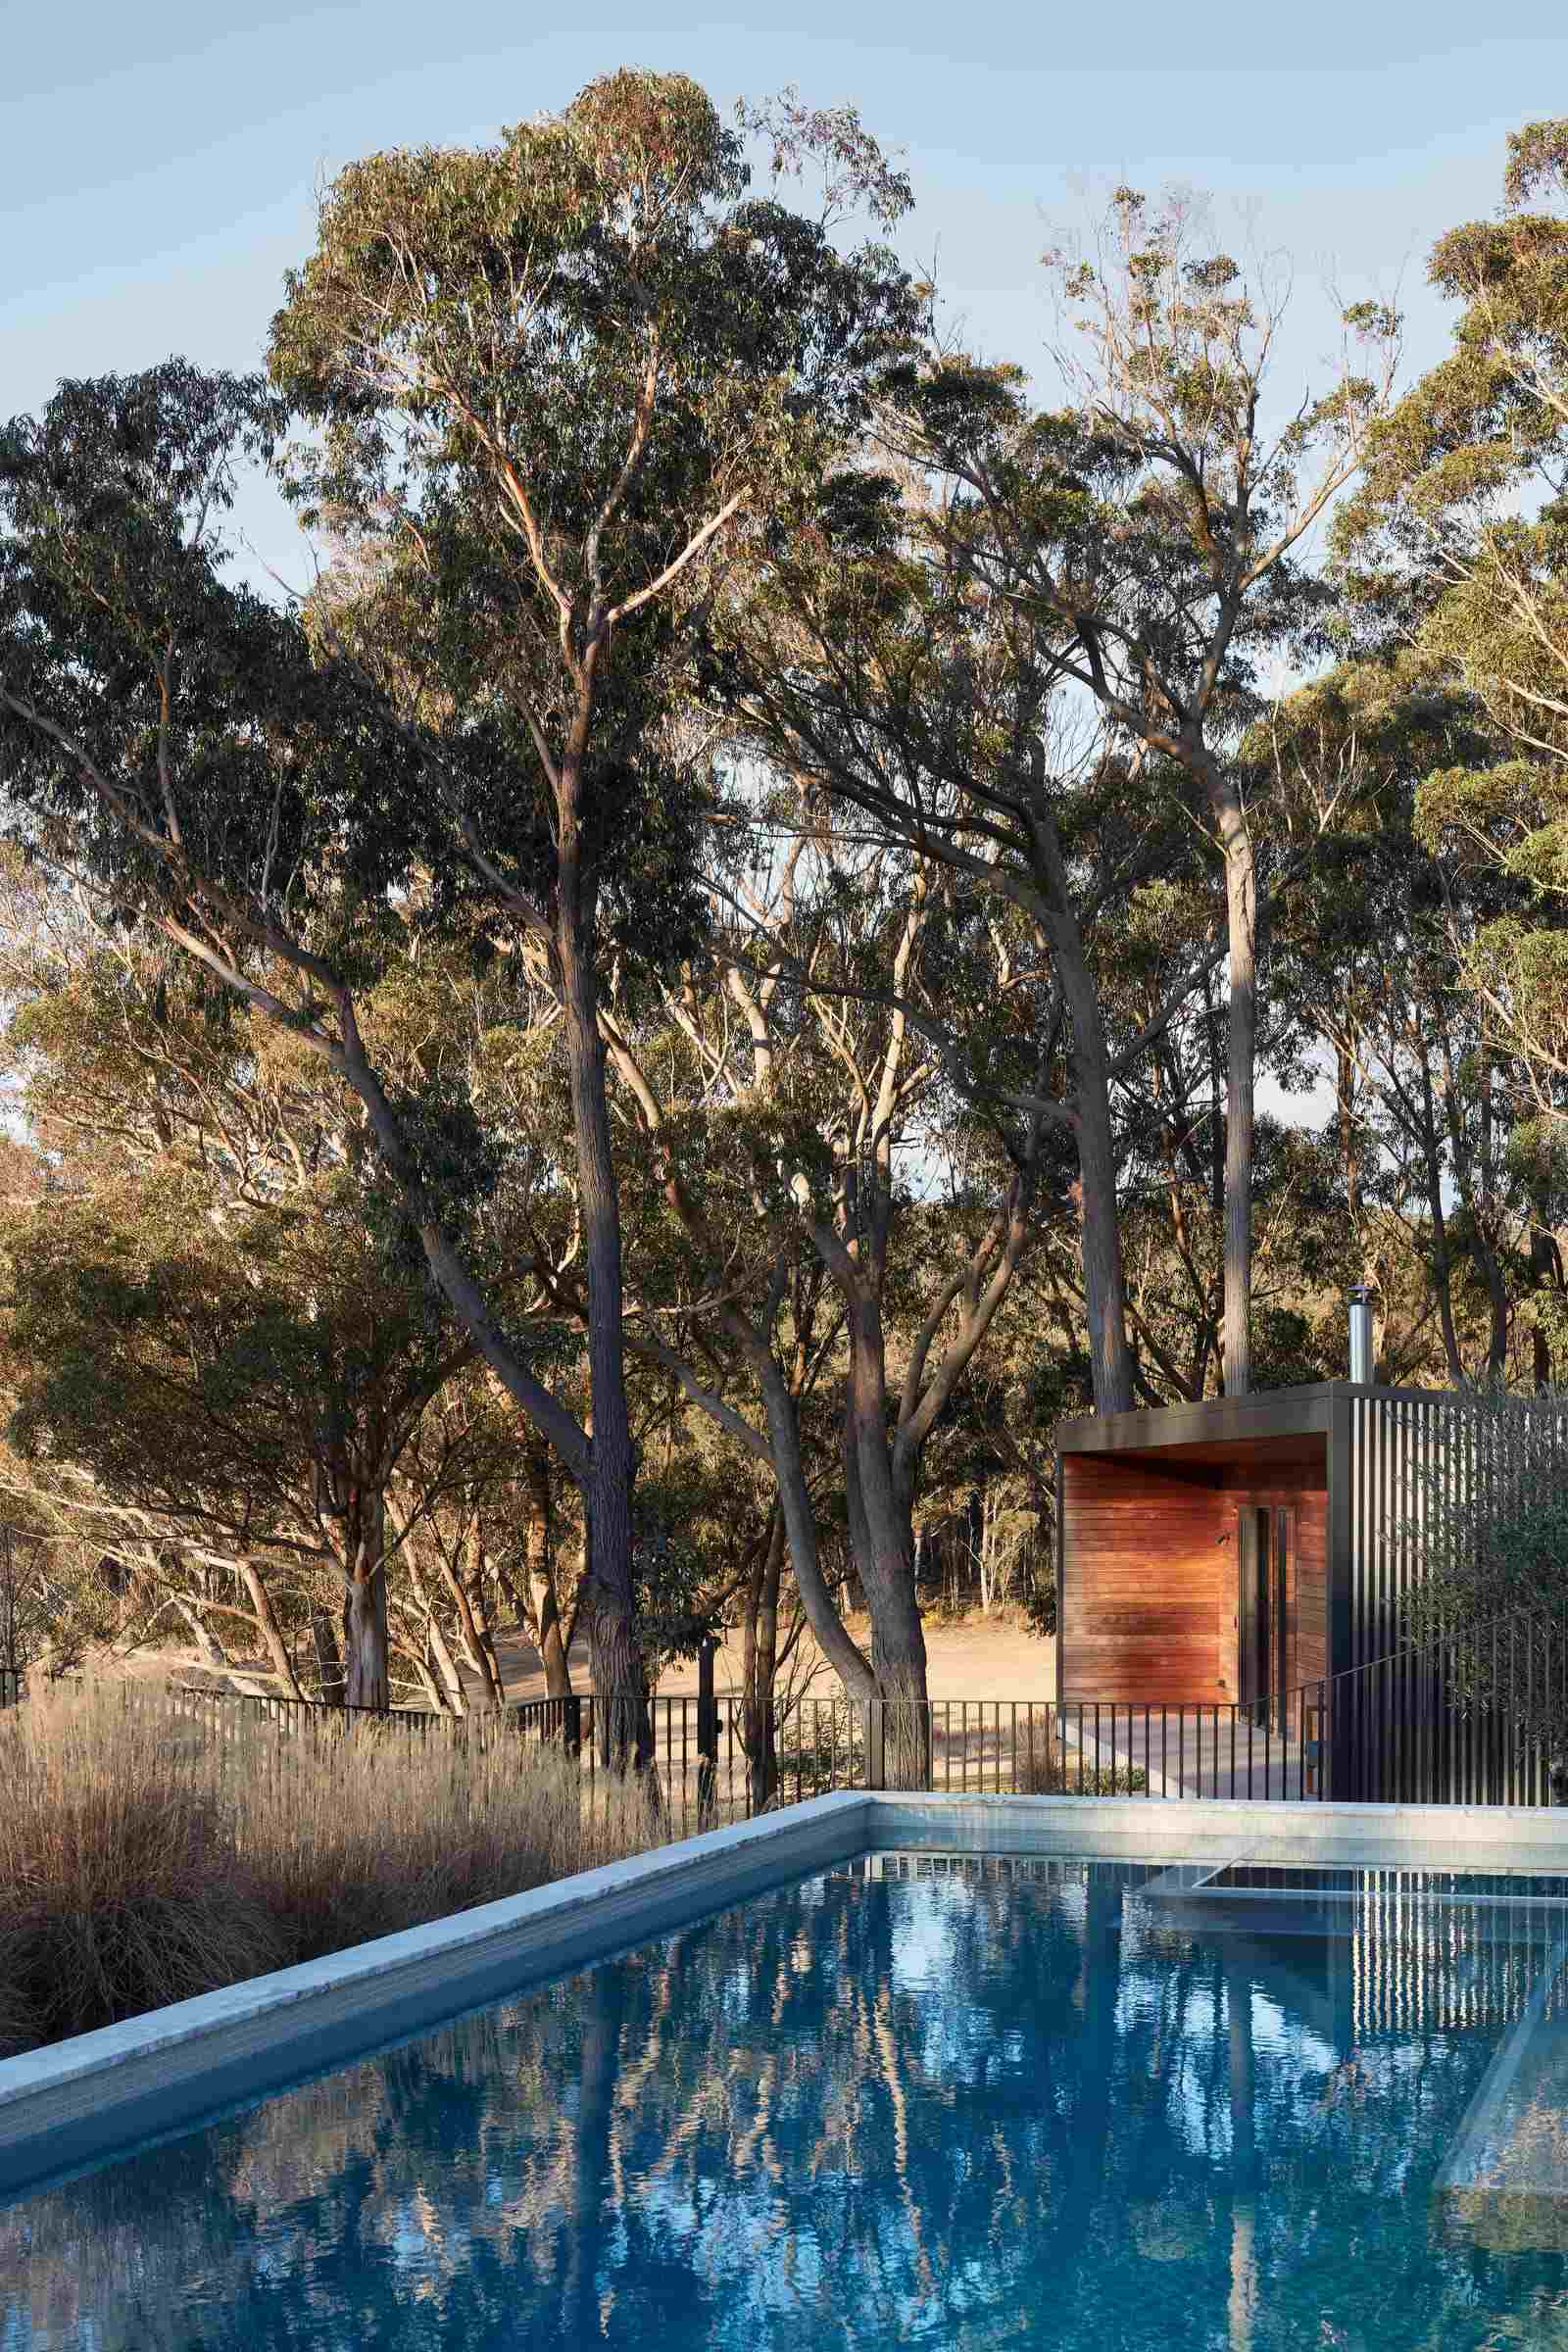 House Woodland by AO Design Studio. This is an outdoor perspective of House Woodland by AD Design Studio showcasing a sleek swimming pool. The pool area is surrounded by a wooden deck and flanked by native trees, with a modern pool house in the background featuring wood paneling and black metal accents.